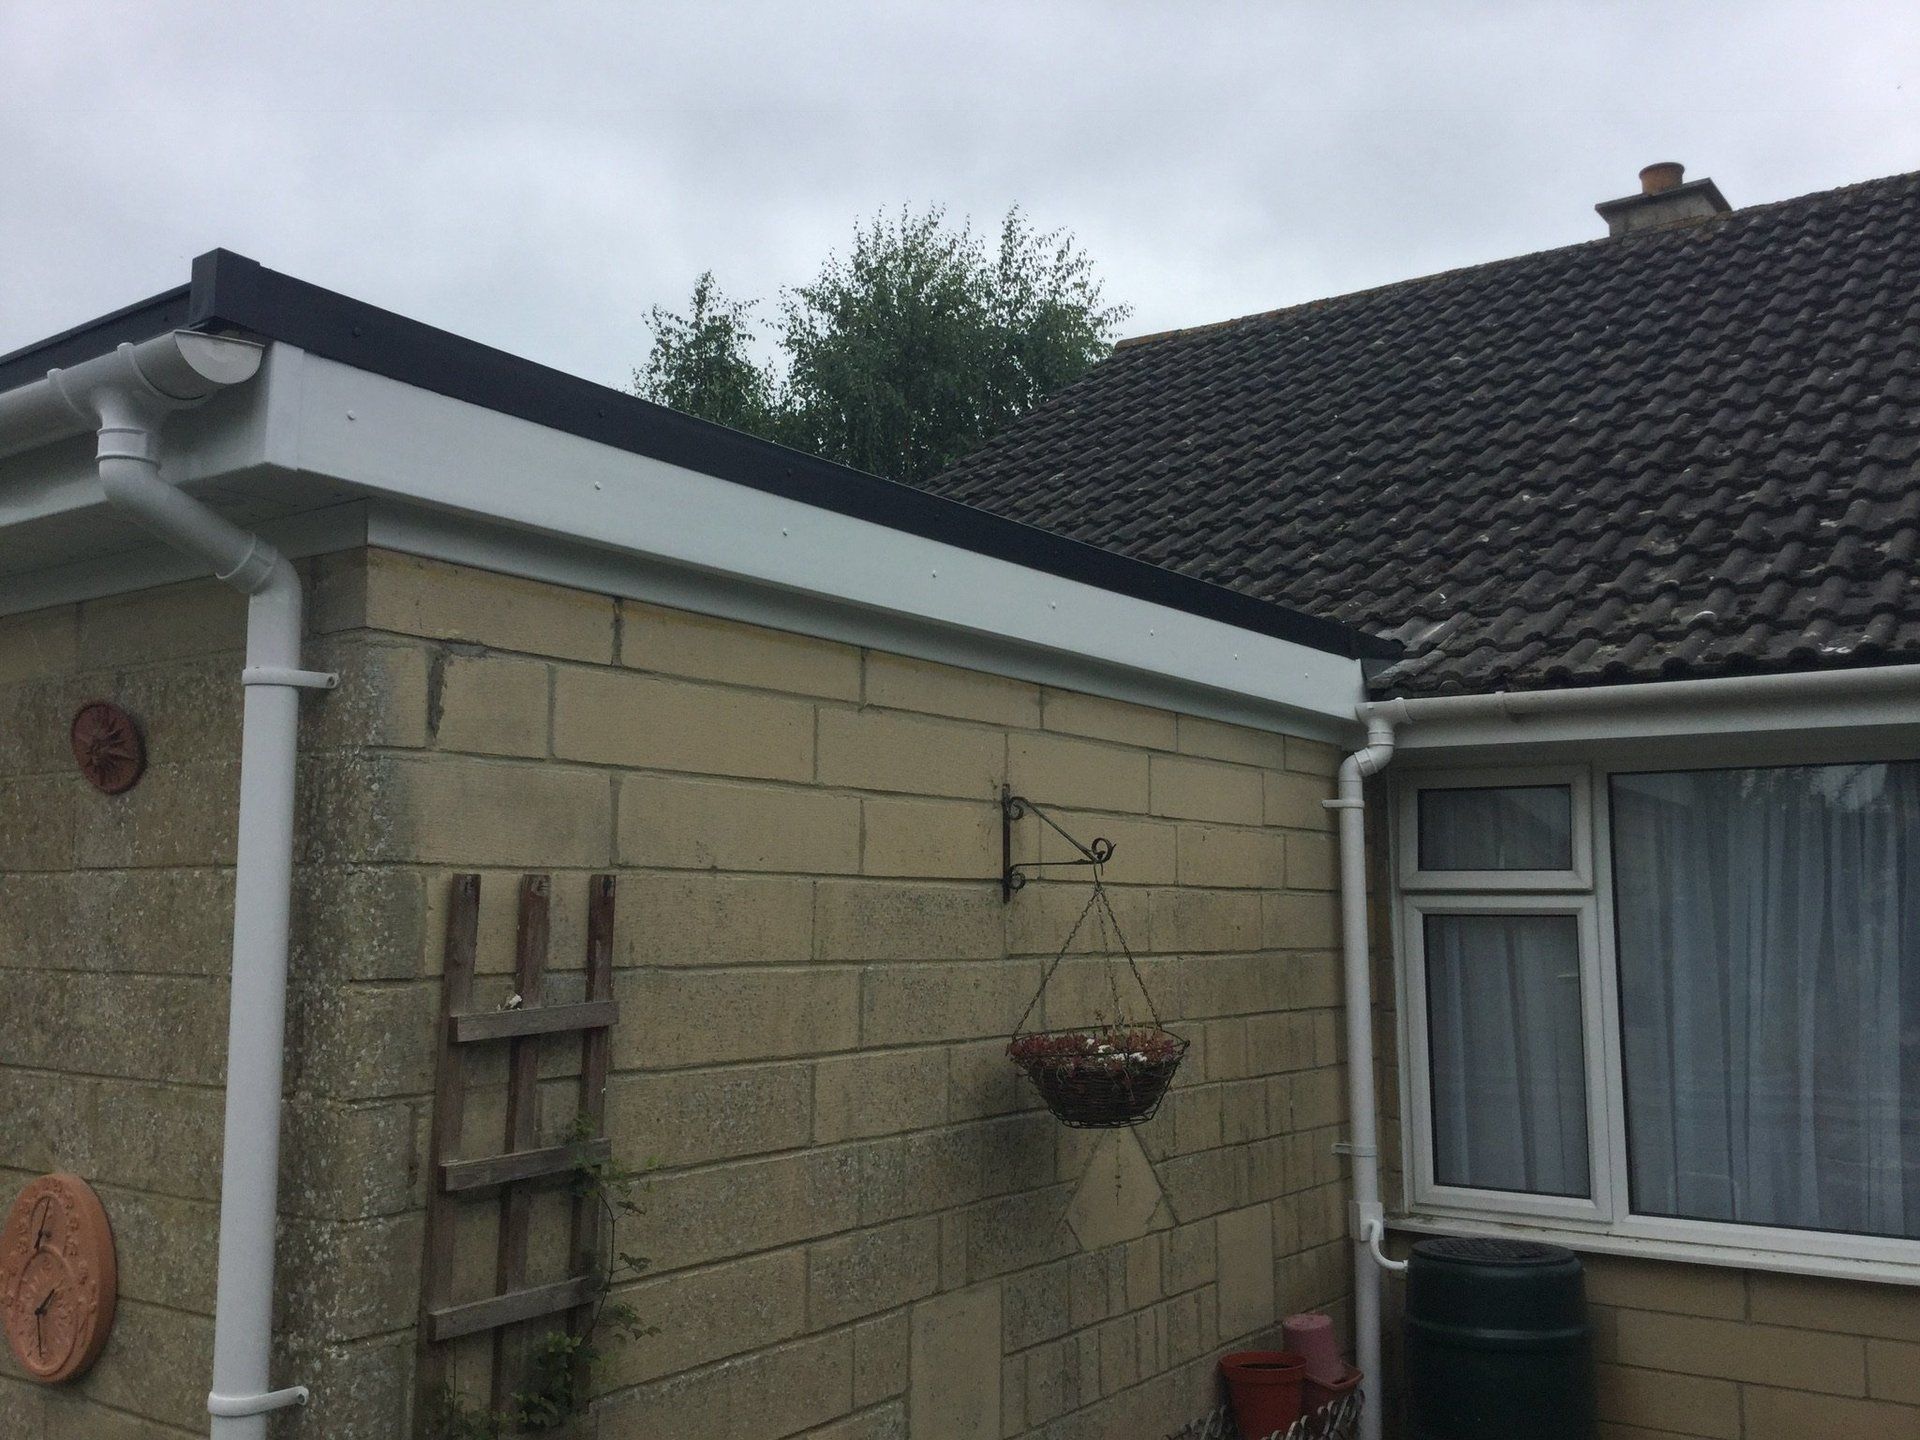 side view from ground of extension with new down pipe and guttering